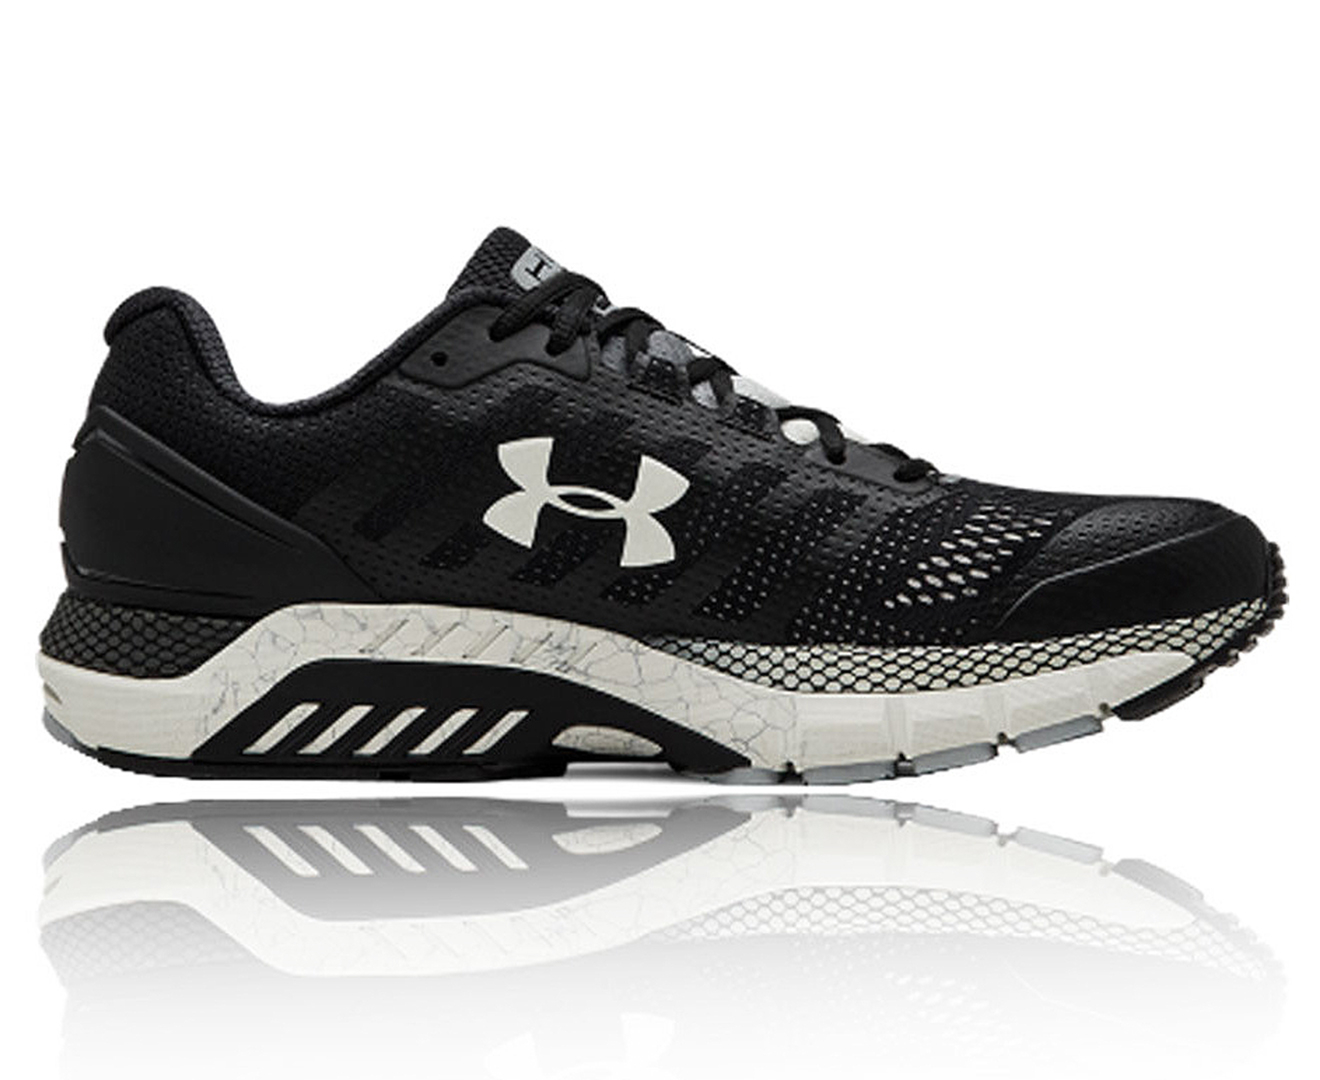 Under Armour Men's HOVR Guardian Running Shoes - Black Sports | Catch.co.nz